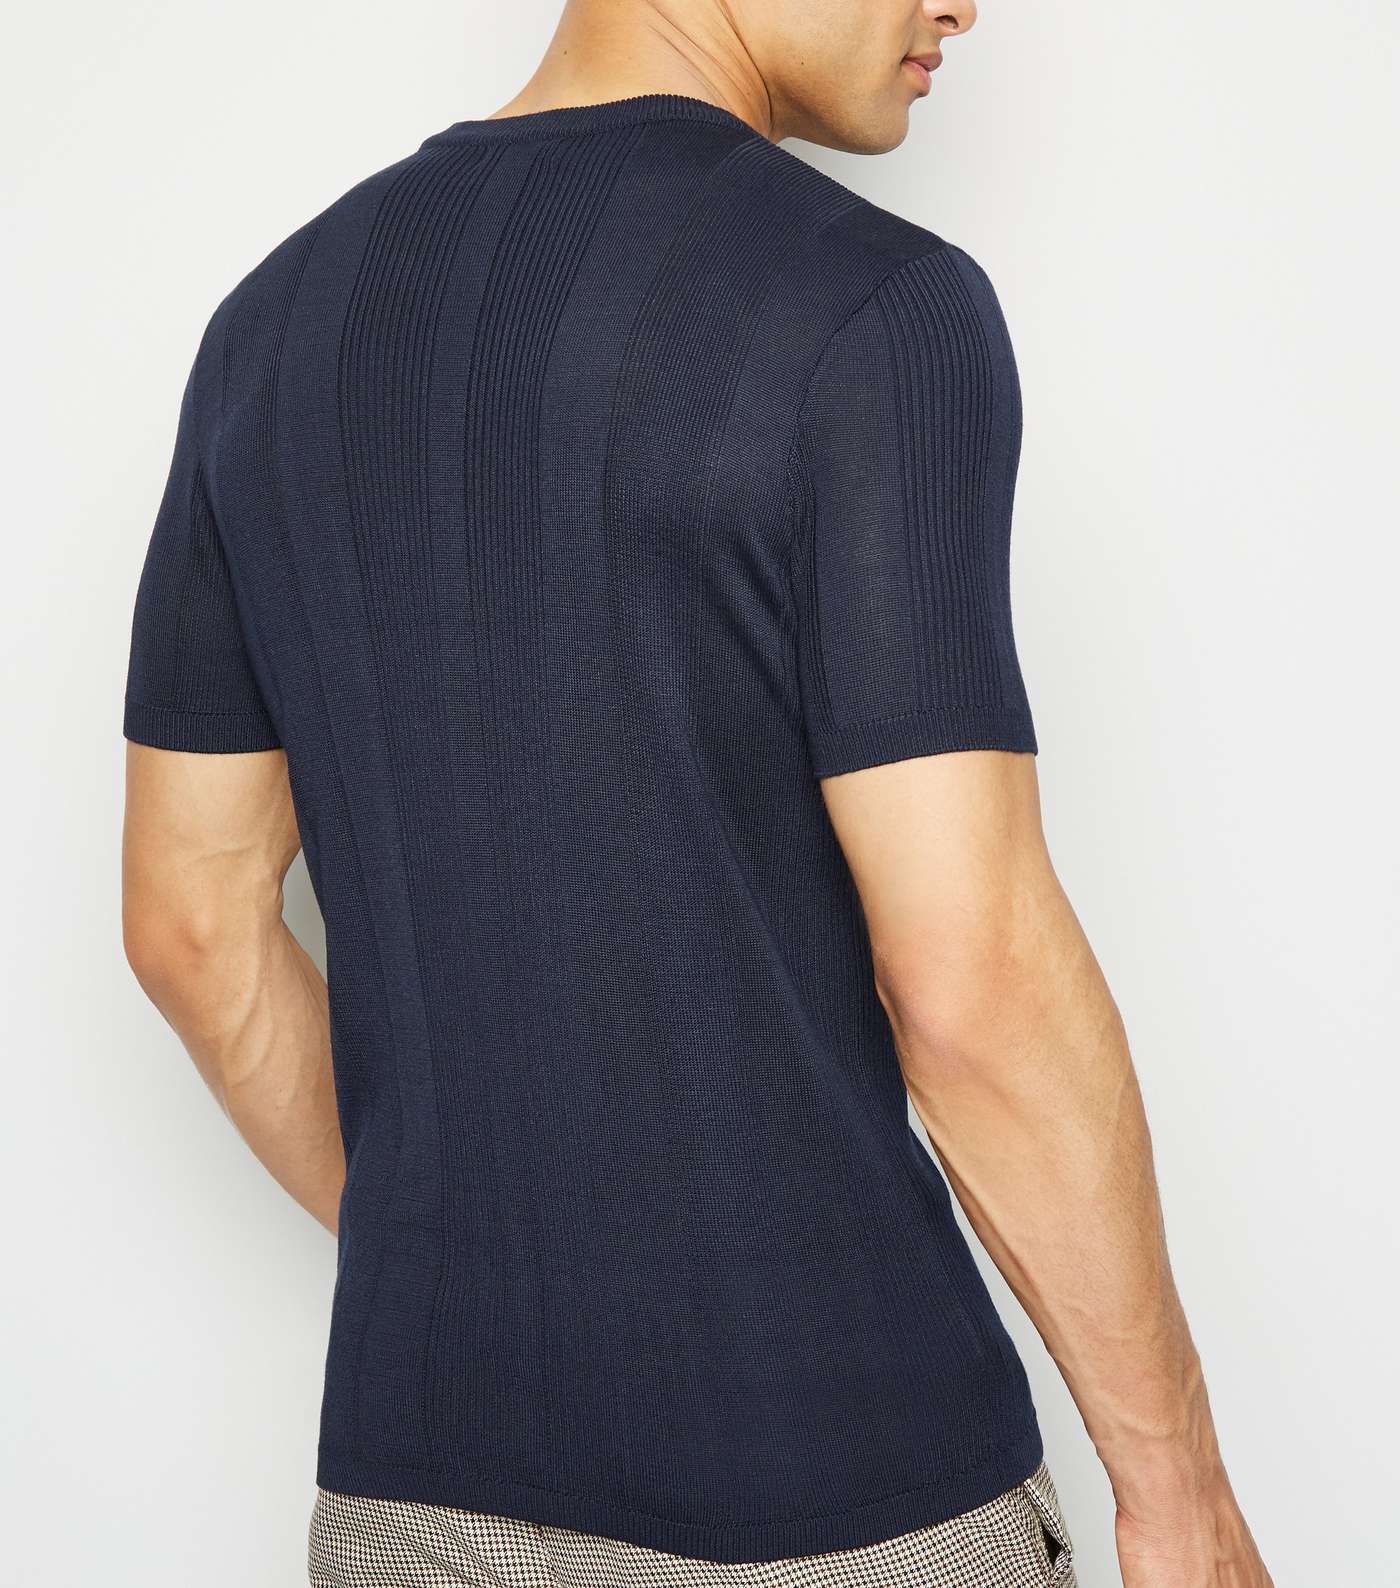 Navy Knit Short Sleeve Muscle Fit T-Shirt Image 3